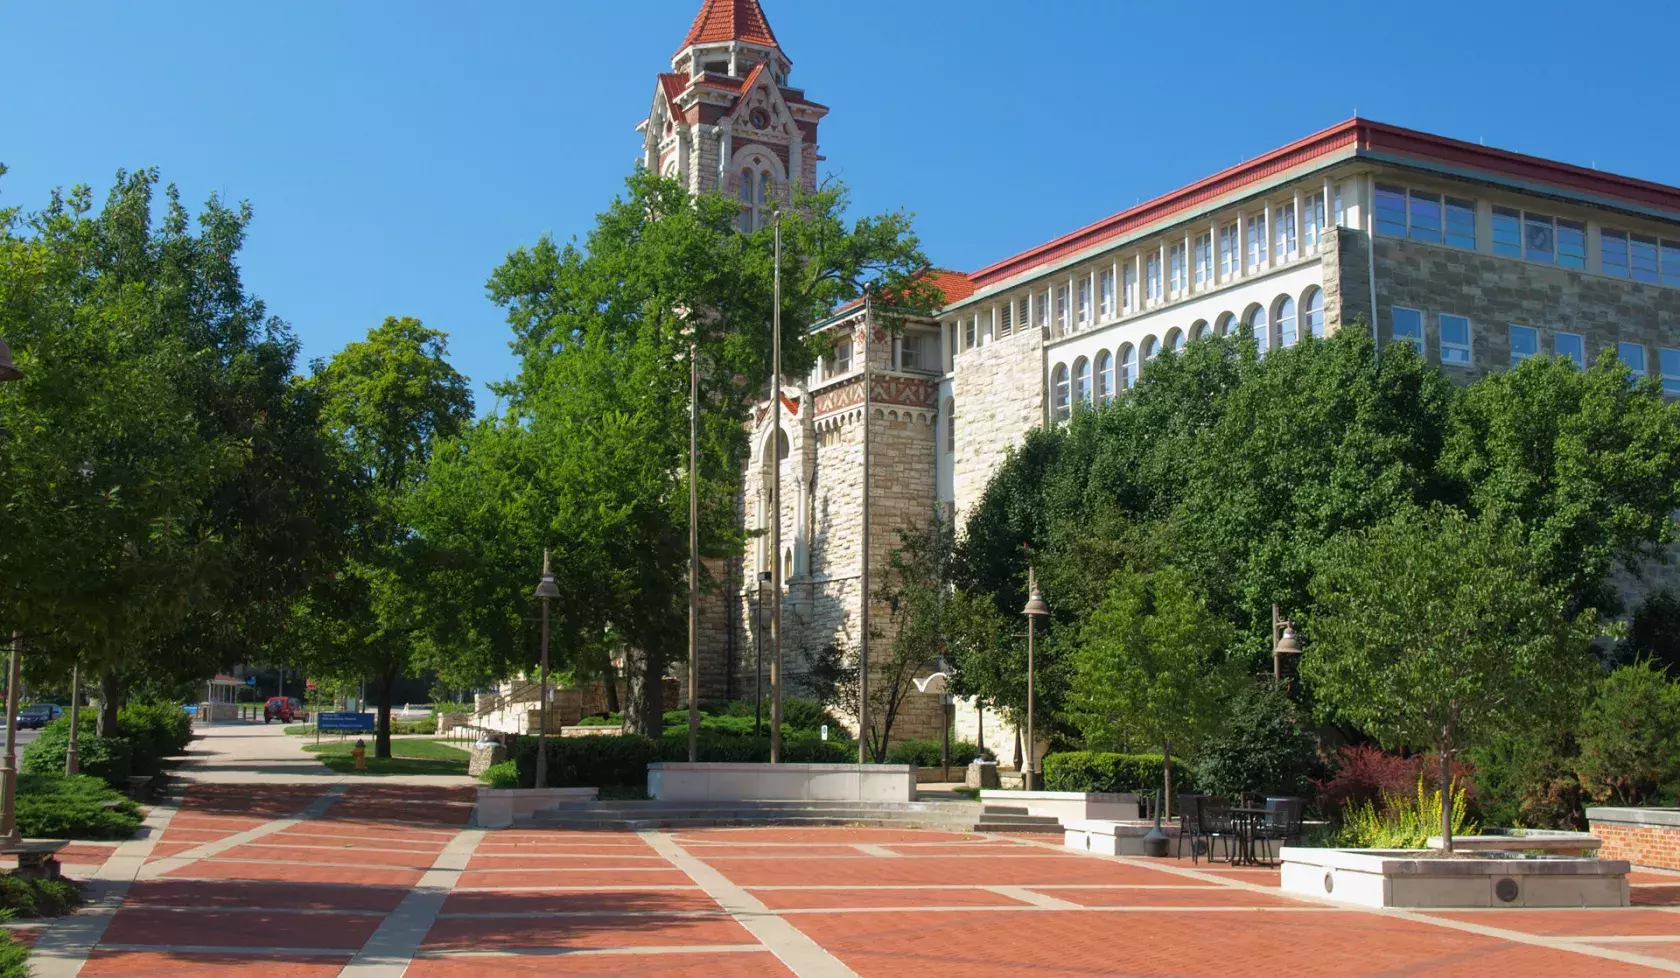 Campus Courtyard and Buildings in the Summertime